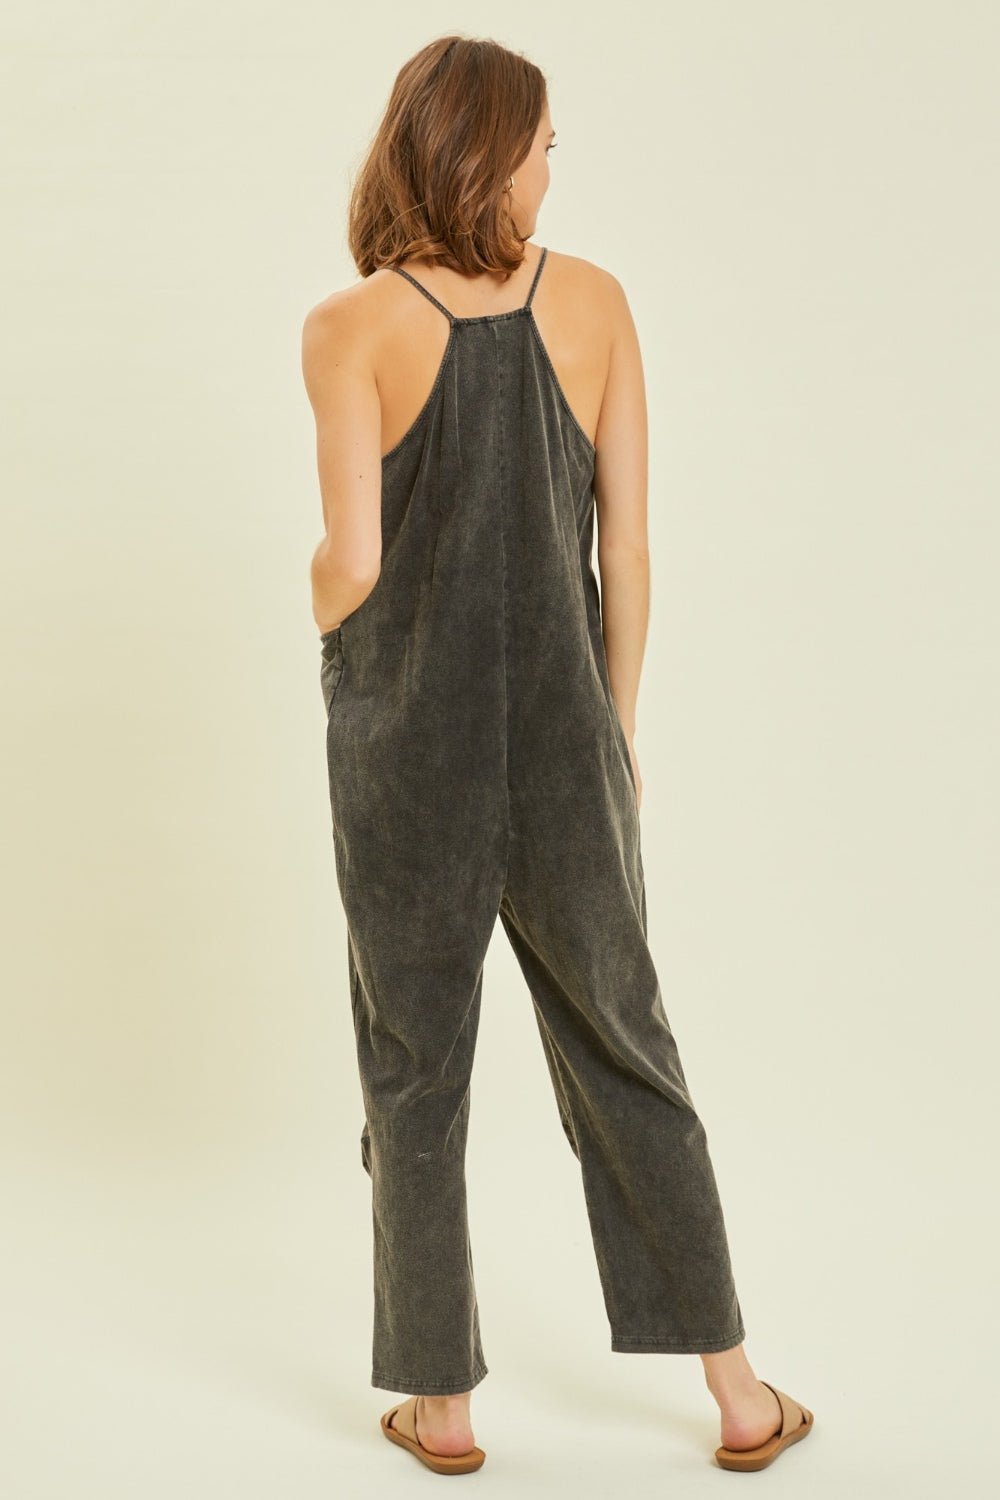 Mineral-Washed Oversized Jumpsuit with Pockets in BlackJumpsuitHEYSON